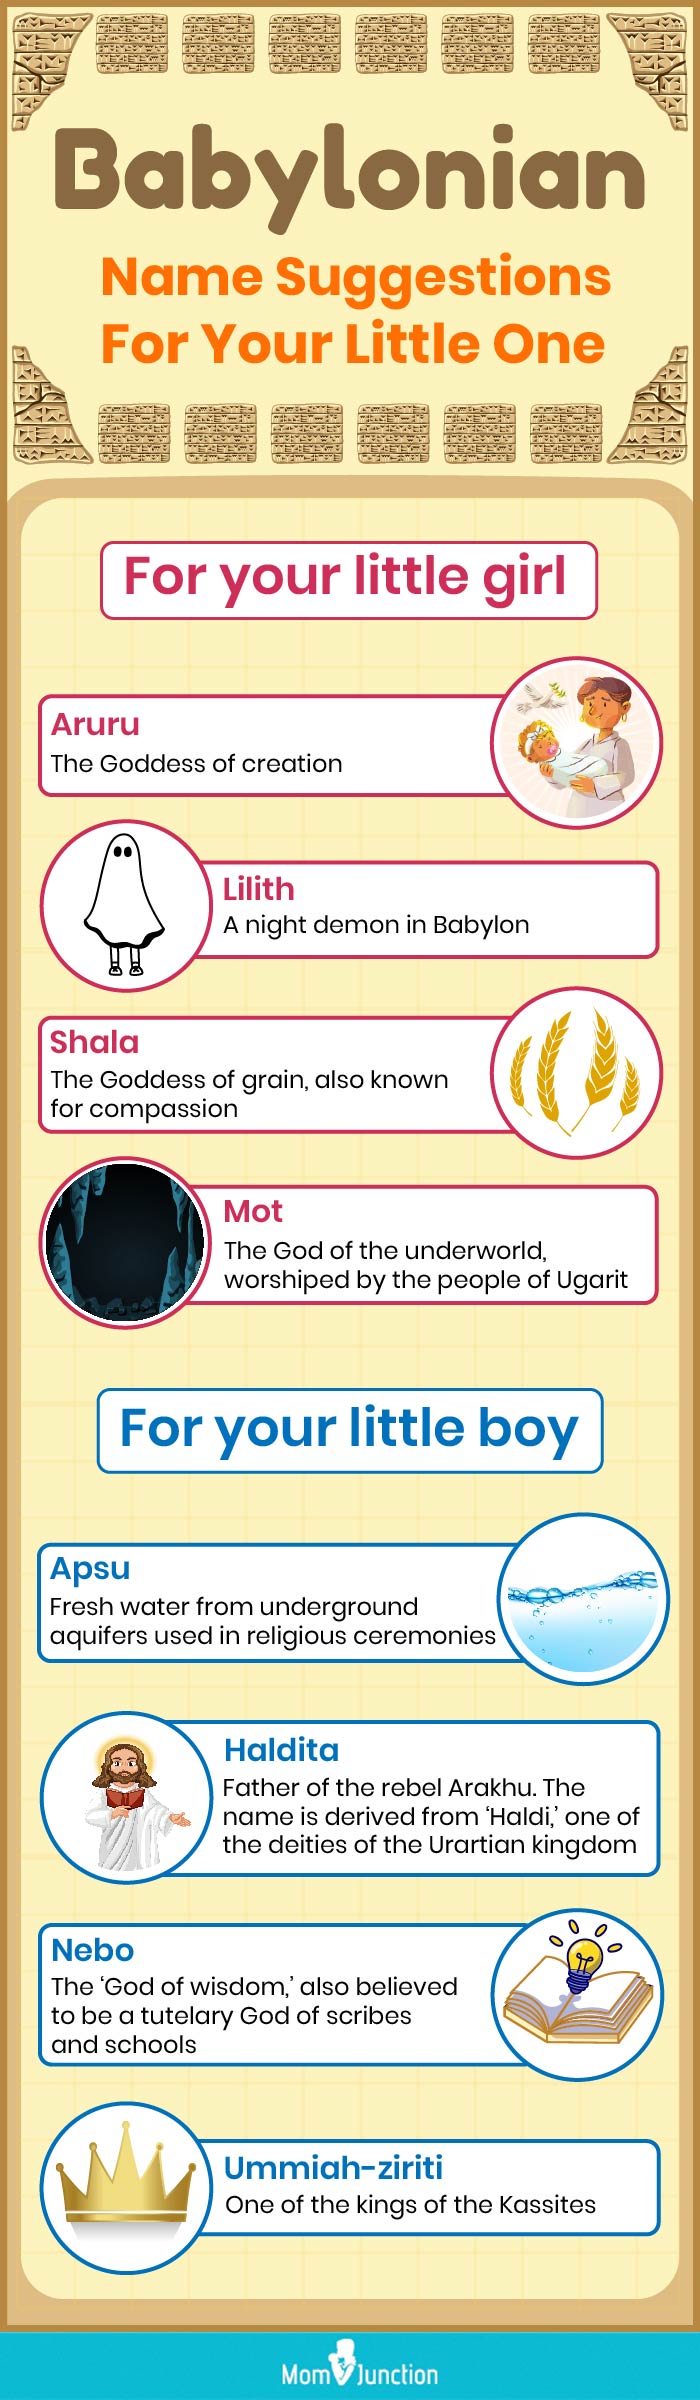 babylonian name suggestions for your little one (infographic)